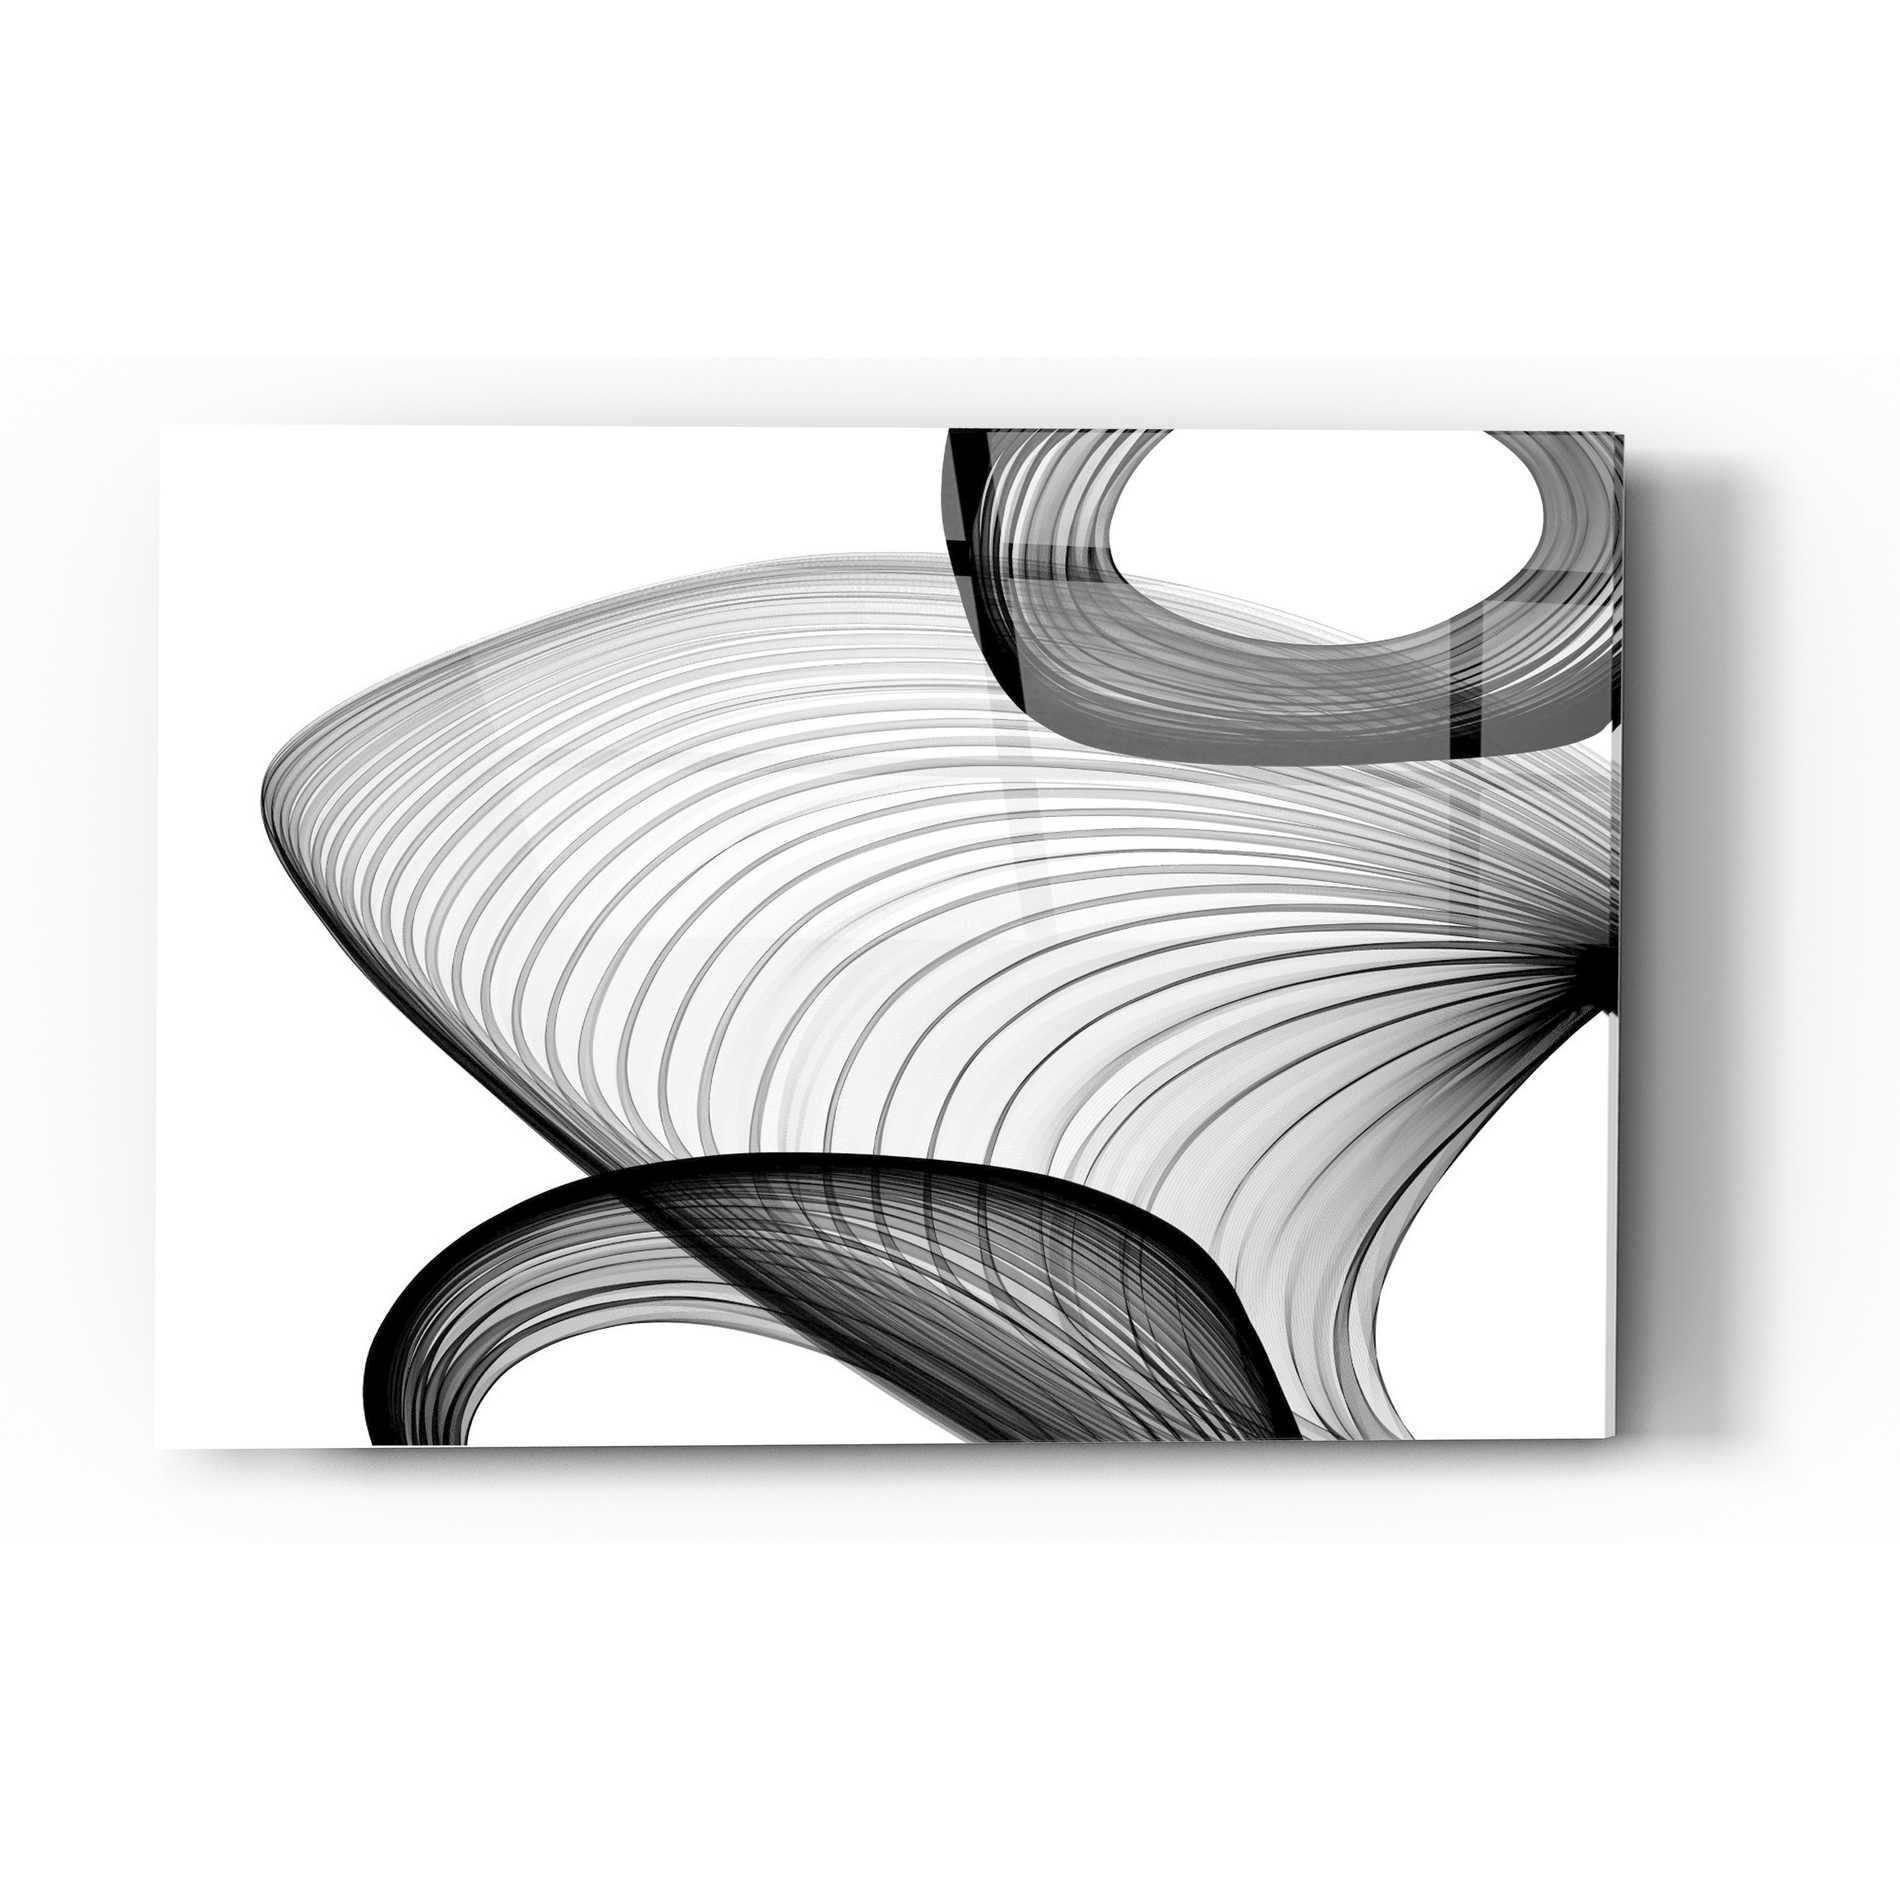 Epic Art 'Abstract Black and White 21-59' by Irena Orlov, Acrylic Glass Wall Art,16x24